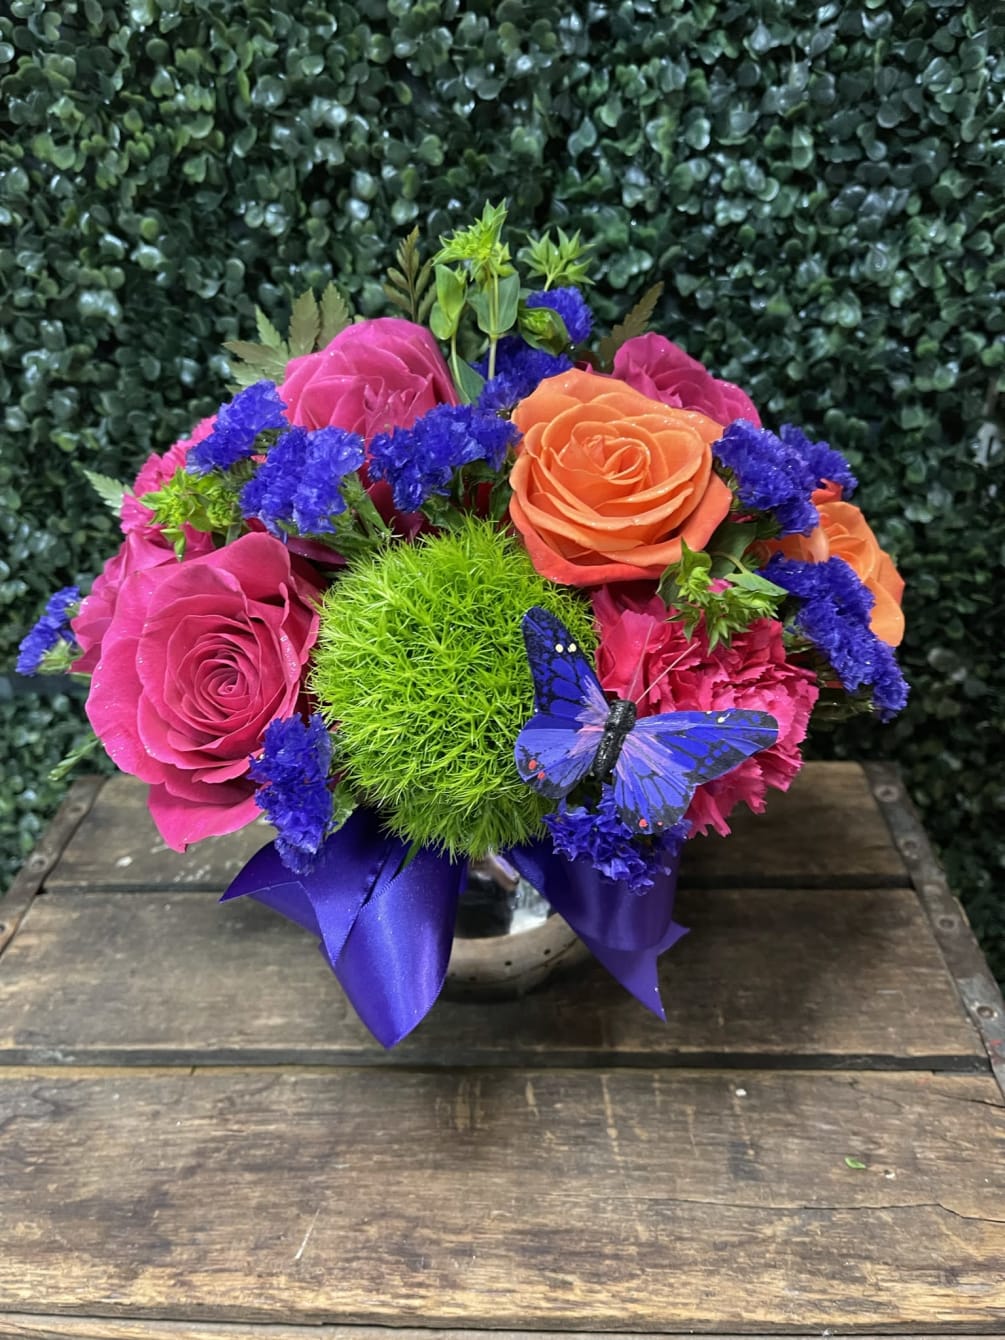 Cheerful and lovely arrangement!